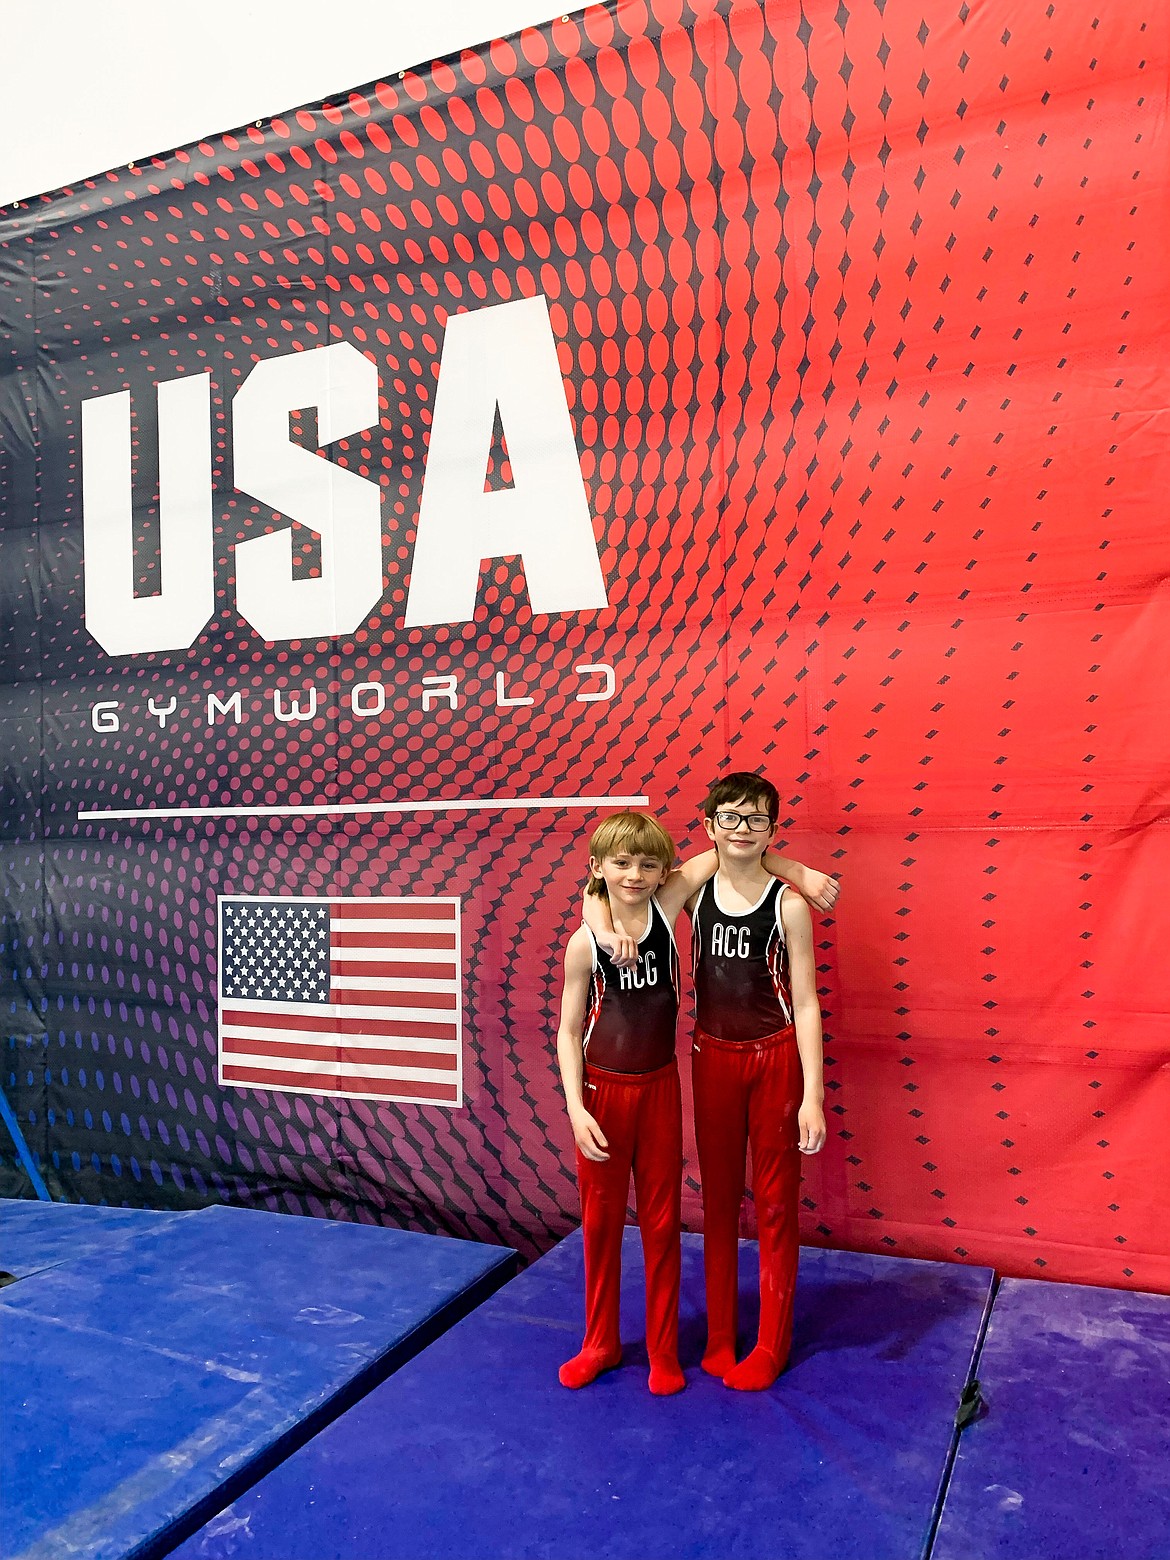 Courtesy photo
Avant Coeur boys Level 3s at the Idaho state gymnastics championships in Moscow. From left are Owen Wilcox and Ray Brown.